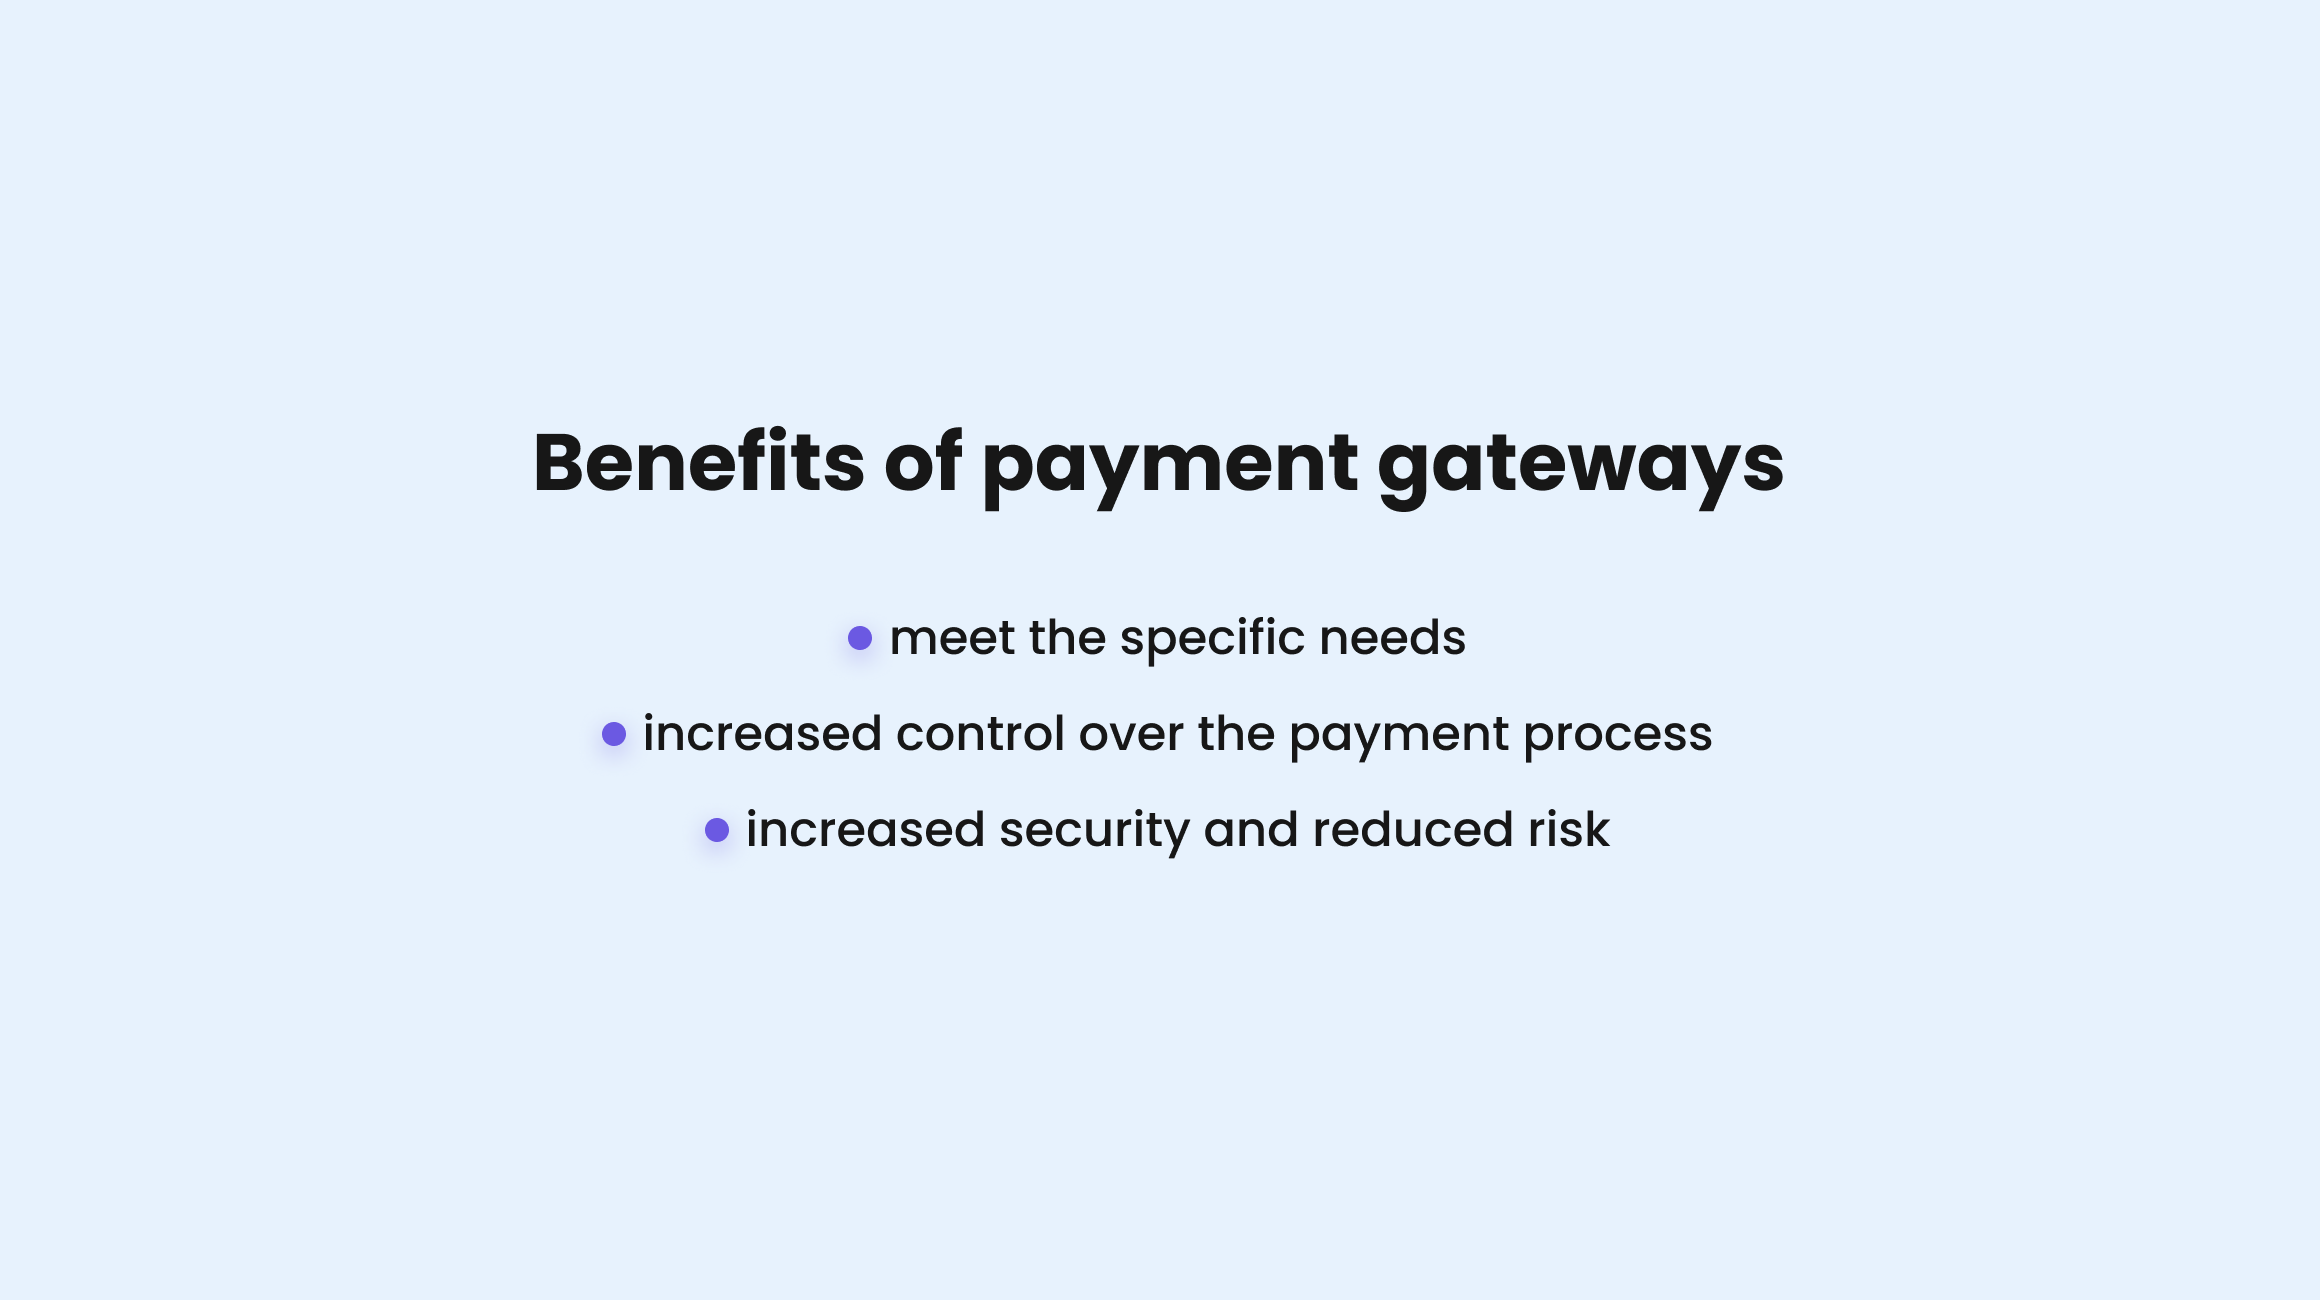 Benefits of payment gateways